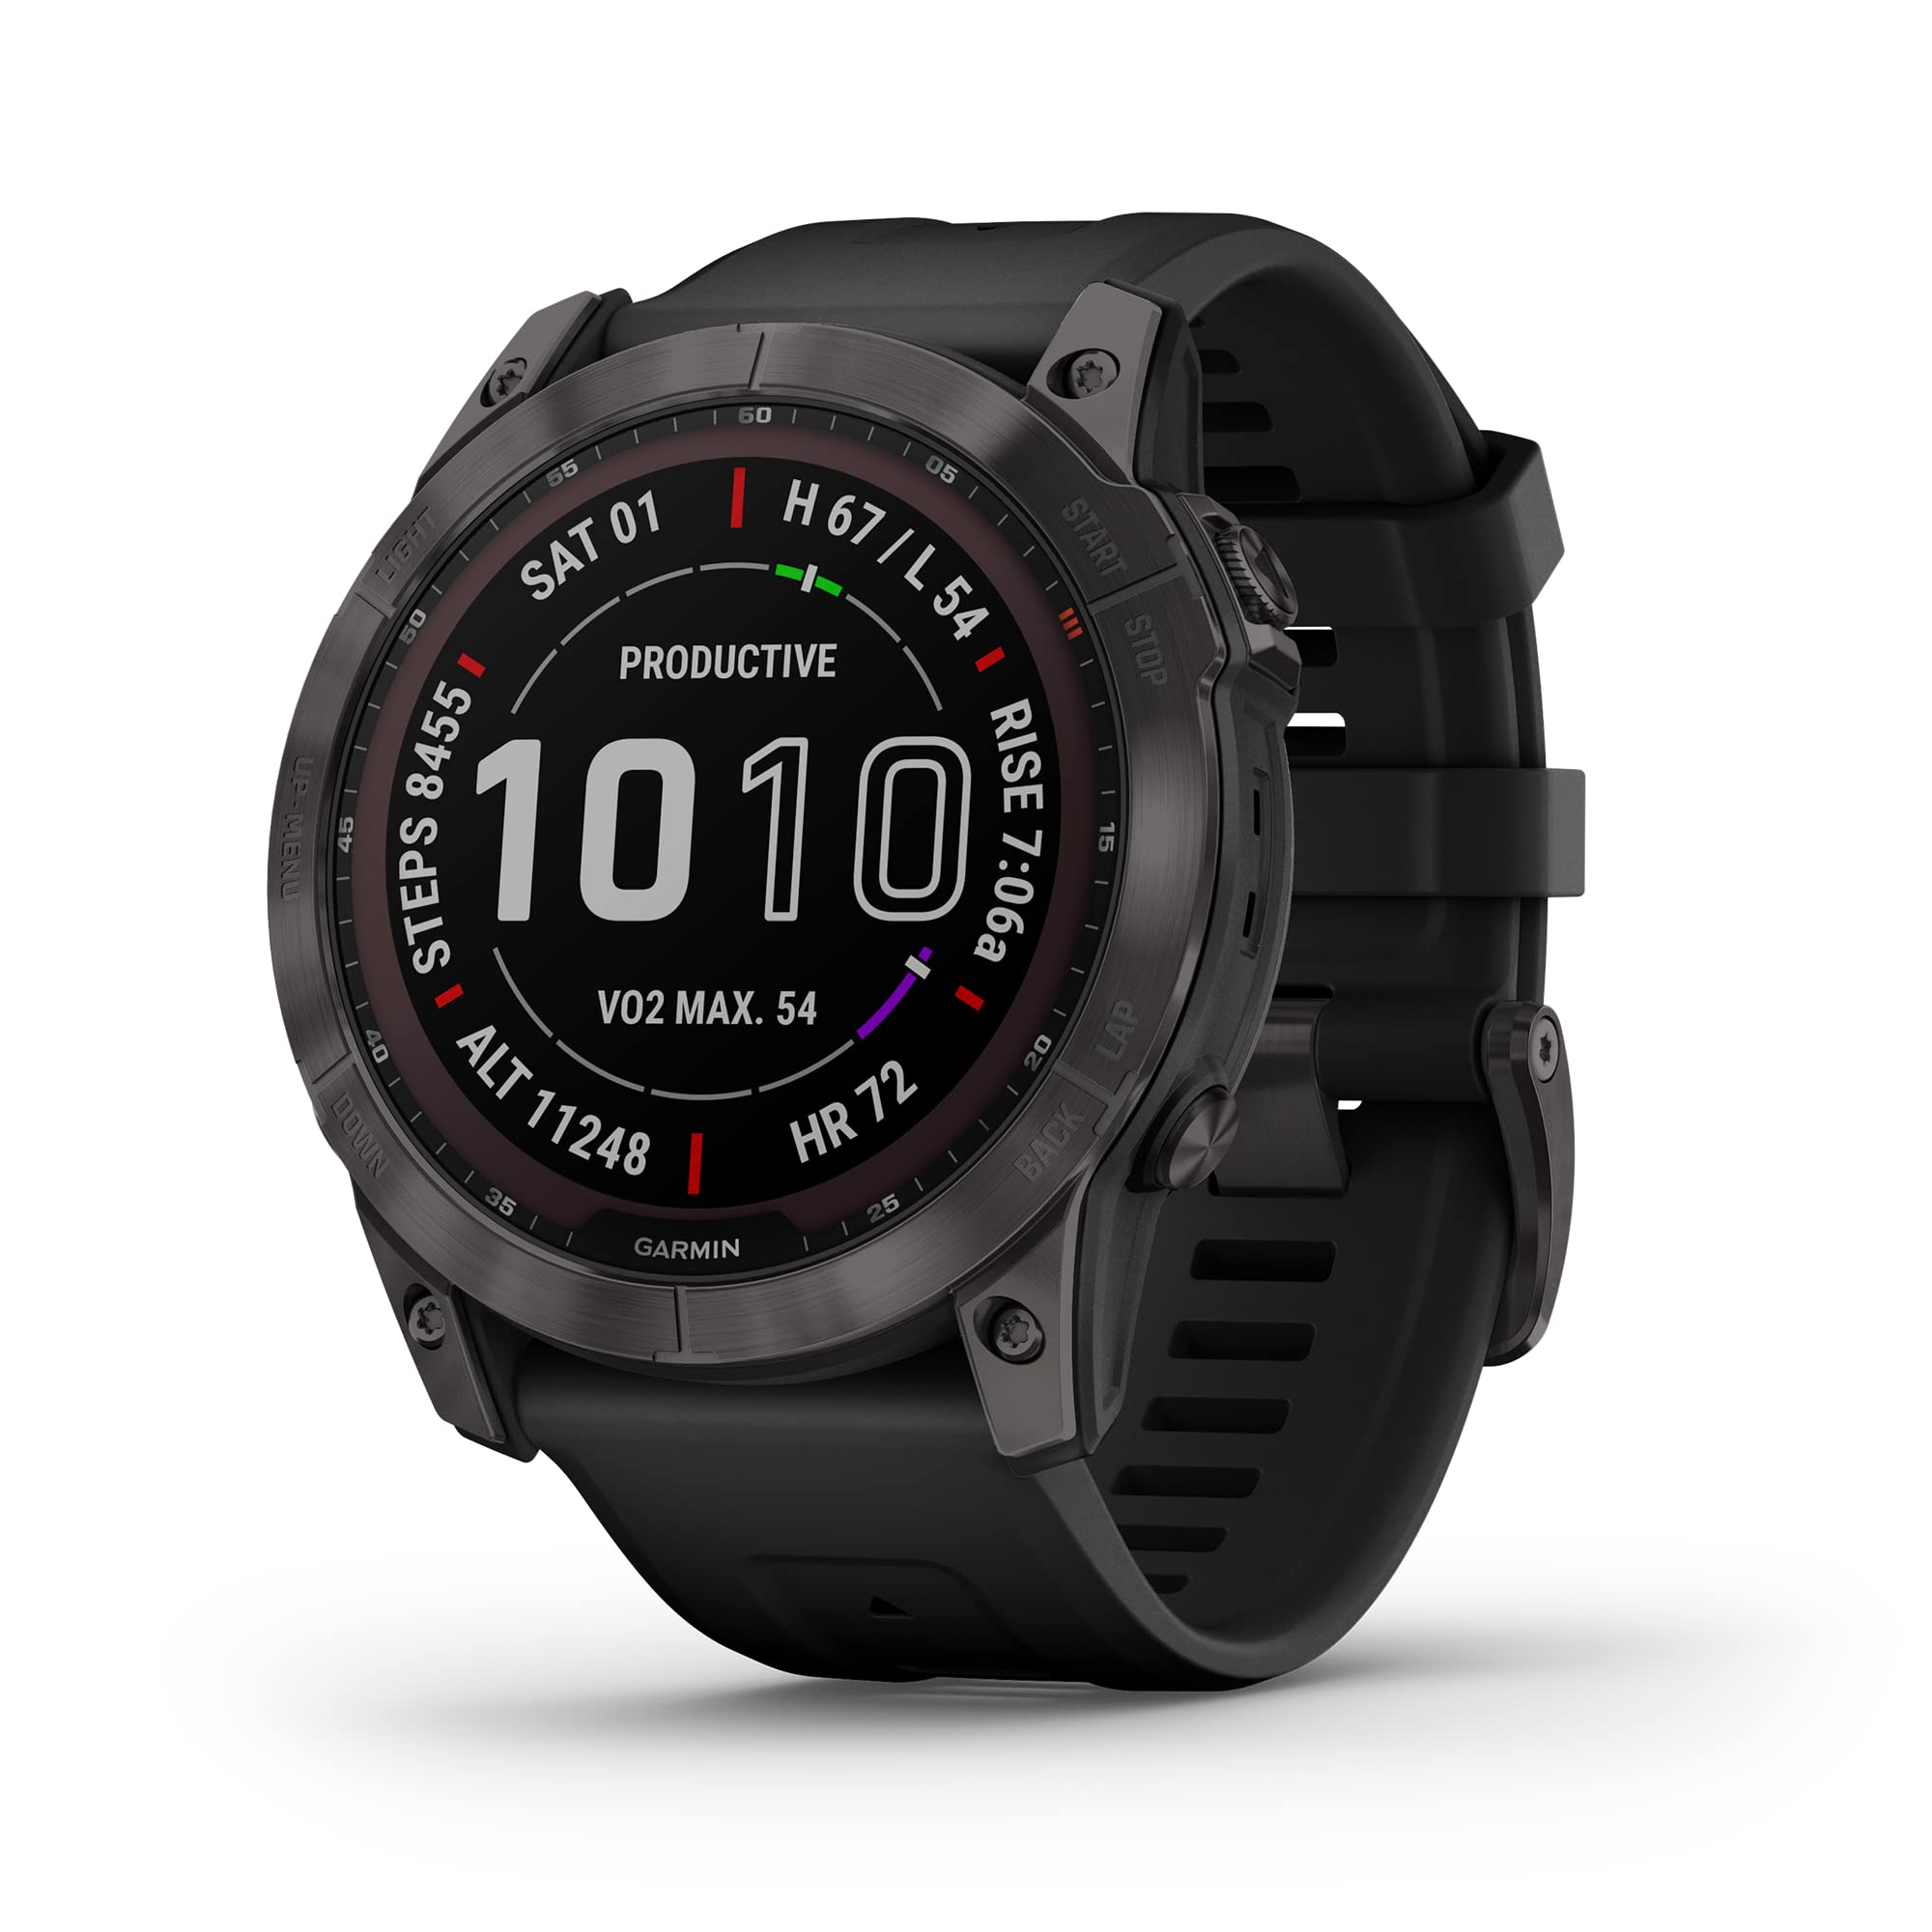 Garmin fenix 7X Sapphire Solar, Larger adventure smartwatch, with Solar Charging Capabilities, rugged outdoor watch with GPS, touchscreen, wellness features, carbon gray DLC titanium with black band